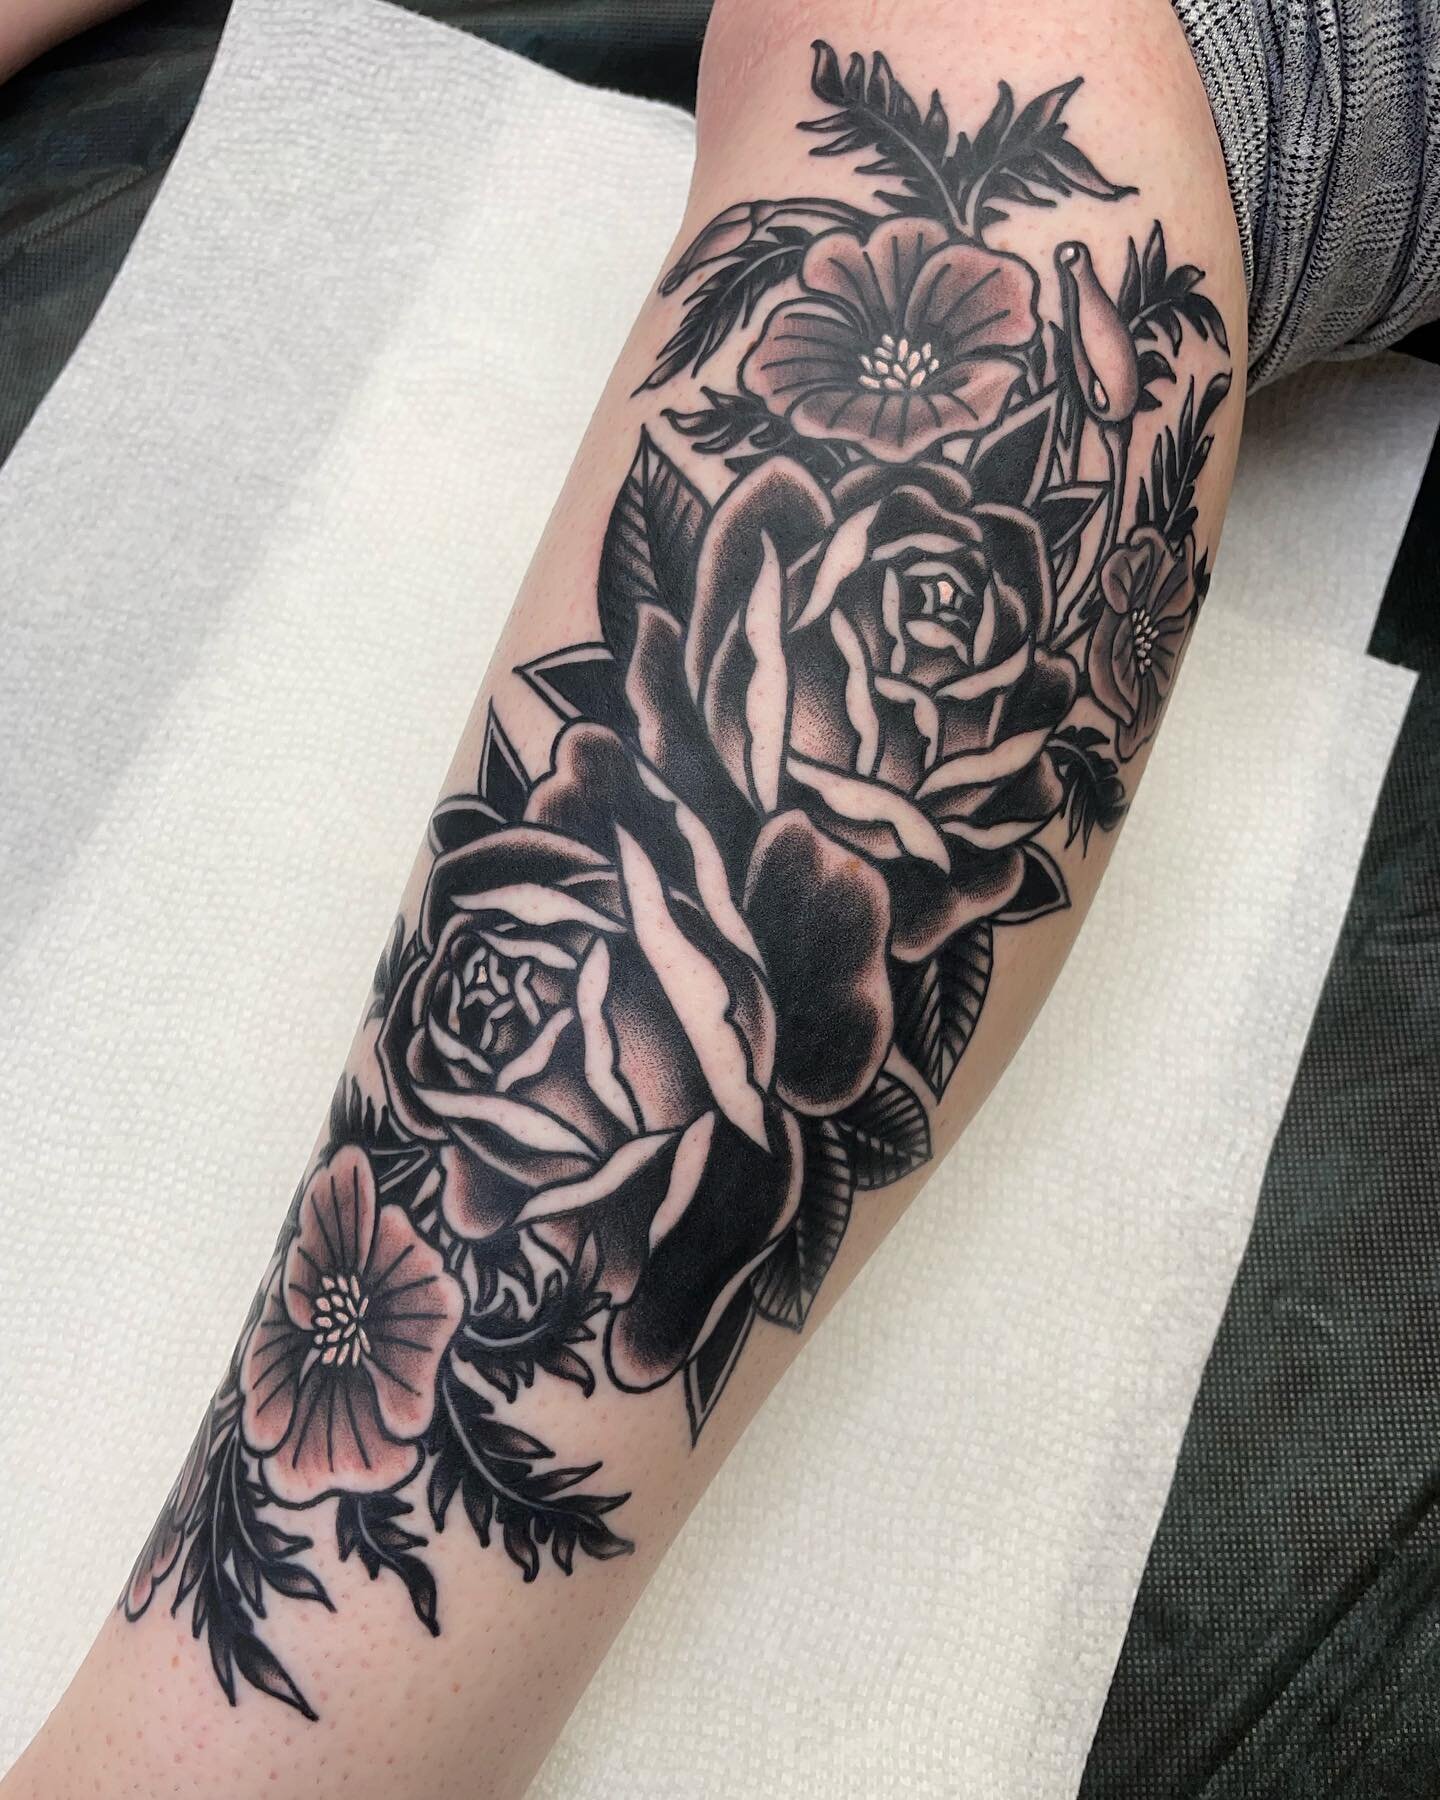 Stuff I forget to post. Here&rsquo;s some traditional black flowers 
Made for @laurenhorsecamp TY

#sanjosetattoos #bayareatattooartist #santacruztattoo #classictattoos #blackandgreytattoo #rosetattoo #romantictattoo #BayAreatattoo #vintagetattoo #bl